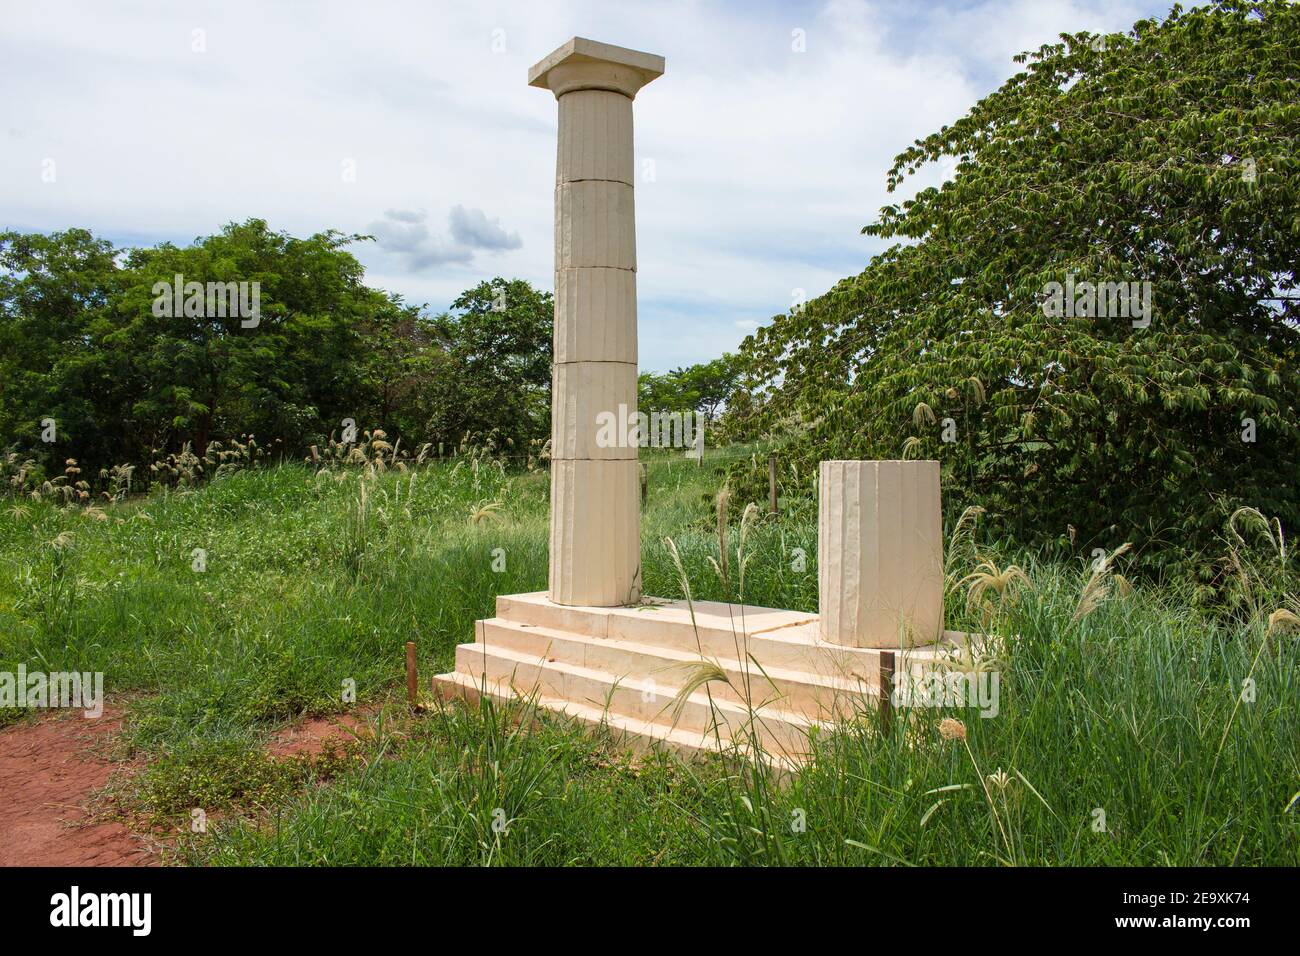 Ibitinga new park in construction called 'Atena'. The monument tributes greek culture Stock Photo